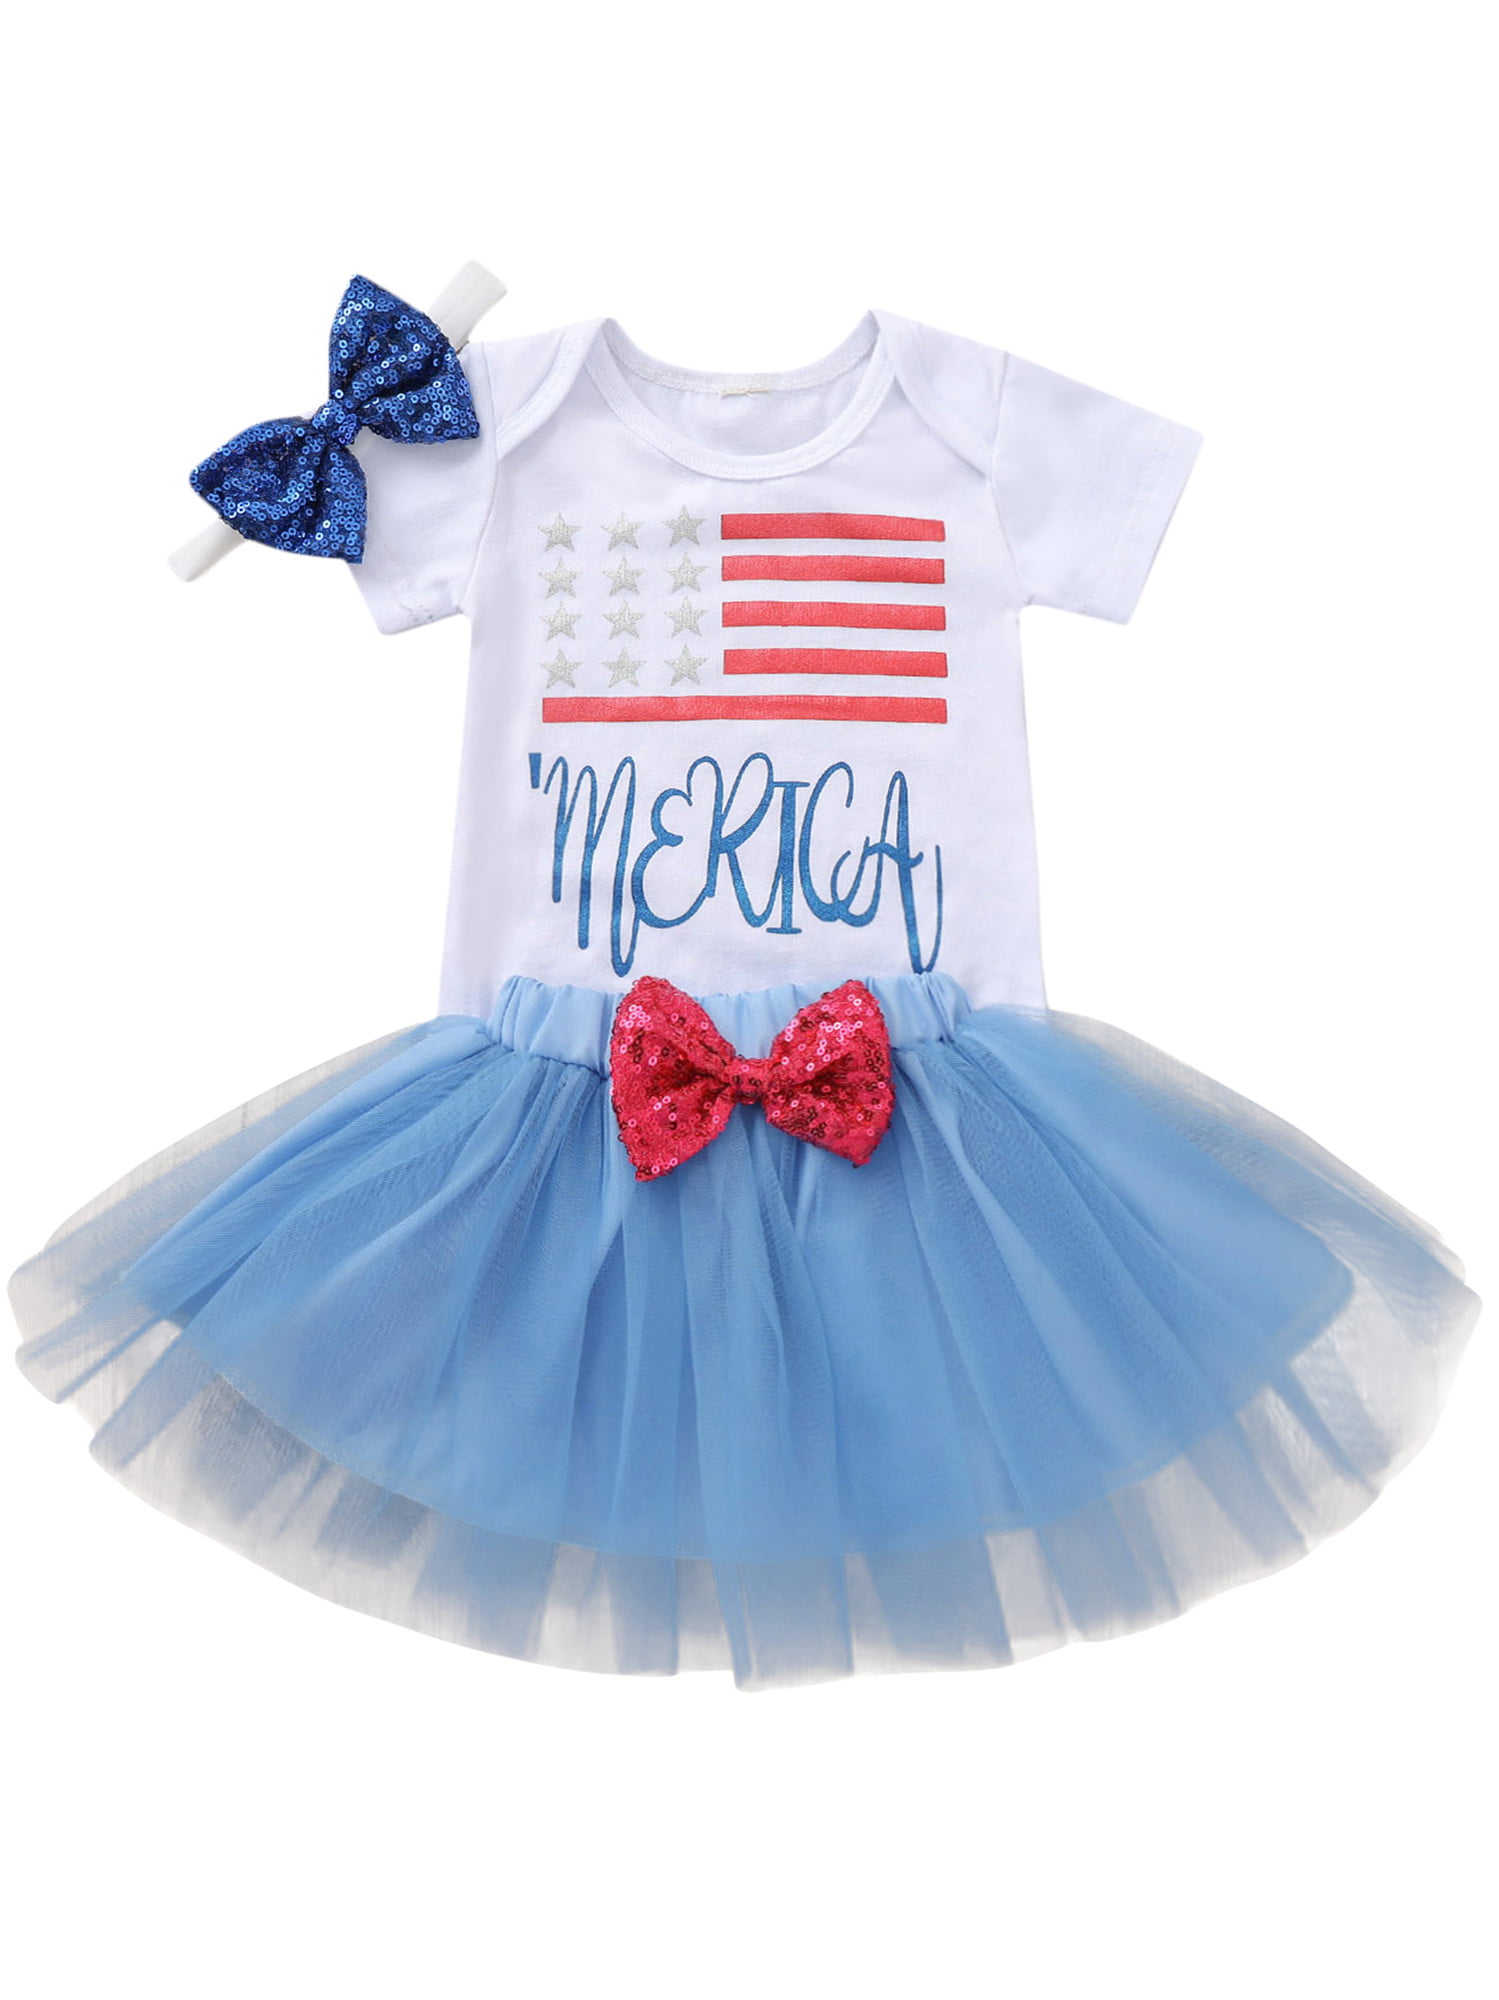 Baby Girls My 1st 4th of July Outfits Short Sleeve Romper+Tutu Skirt+Headbands+Warm Leggings 4PCS Clothes Set